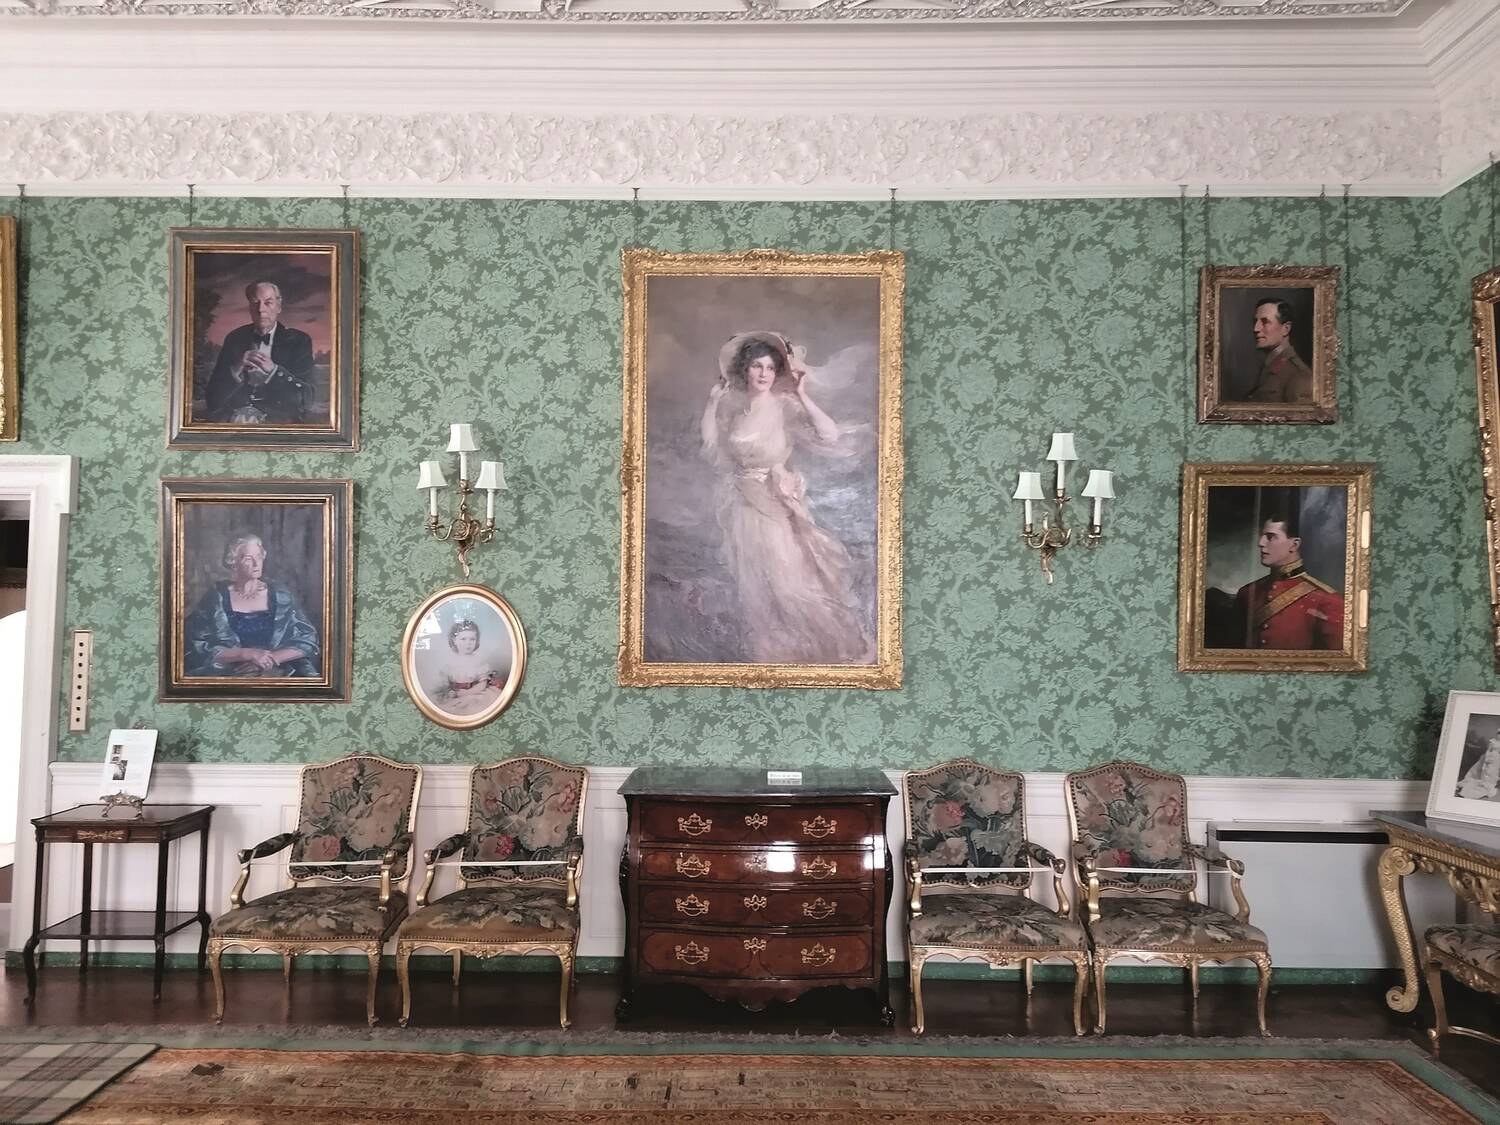 A portrait of a young Edwardian woman, wearing a floaty white dress and a large bonnet, hangs at the centre of a collection of paintings on a green-papered wall. Smart chairs and a polished wooden chest stand below the group of portraits.